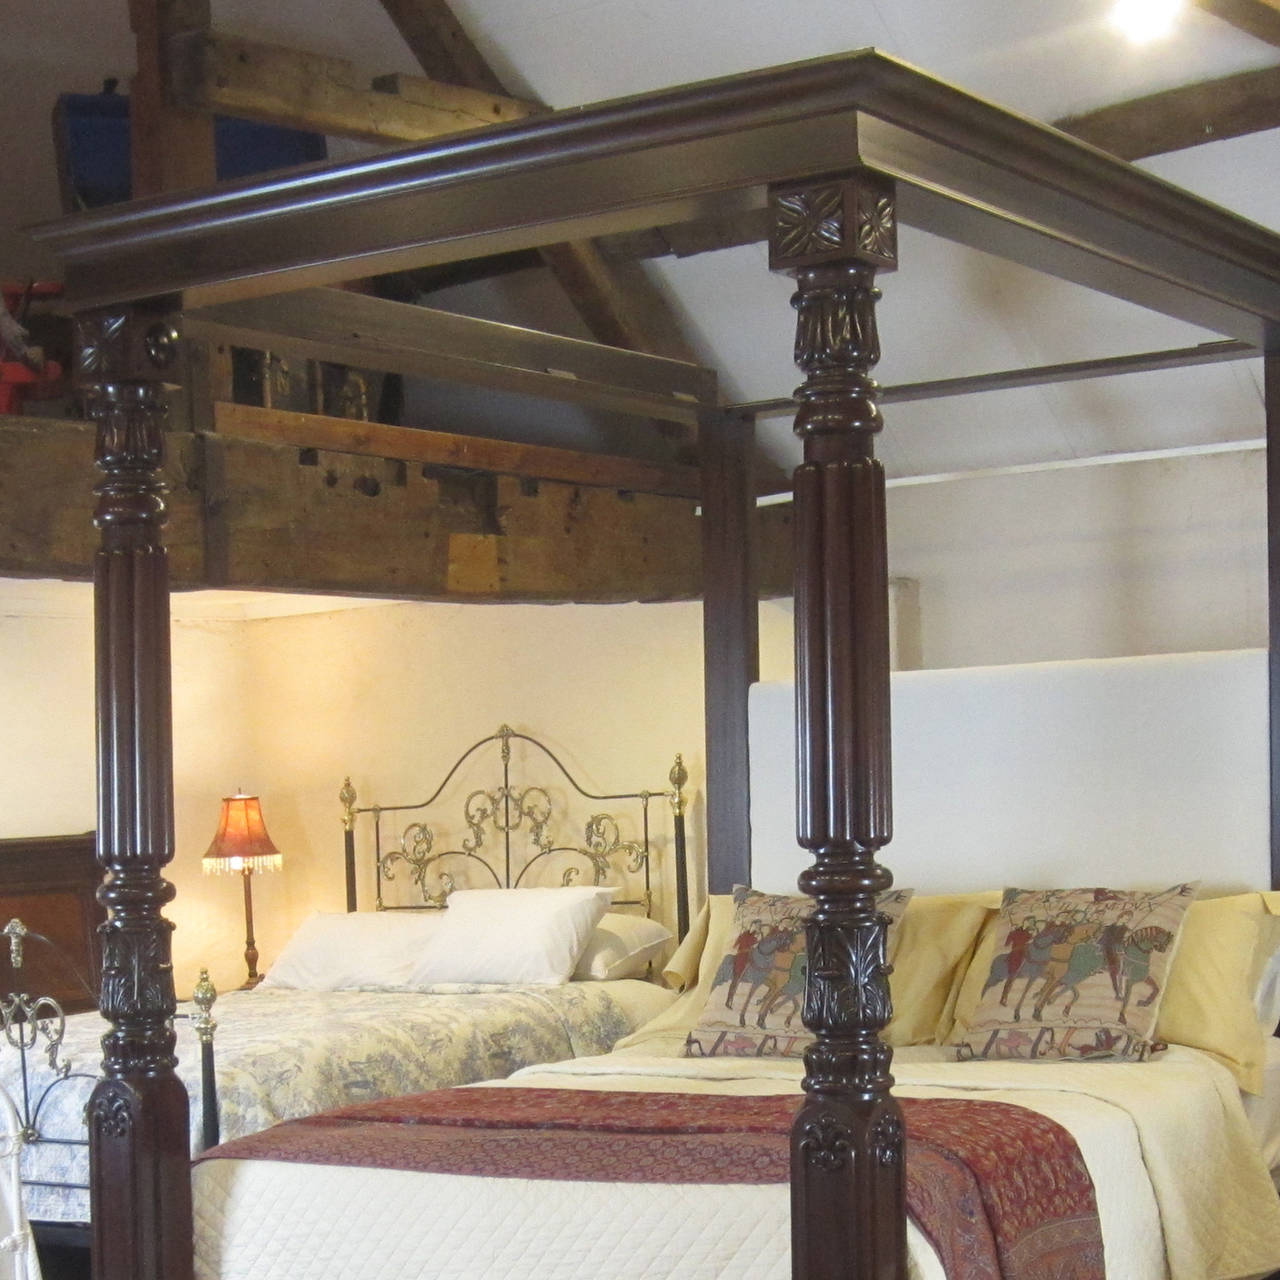 This mahogany four poster bed has superb mid-Nineteenth posts, circa 1860. The remainder of the framework has been reconstructed faithful to the original design.

The posts were sourced from Paris but possibly they originated from the French West